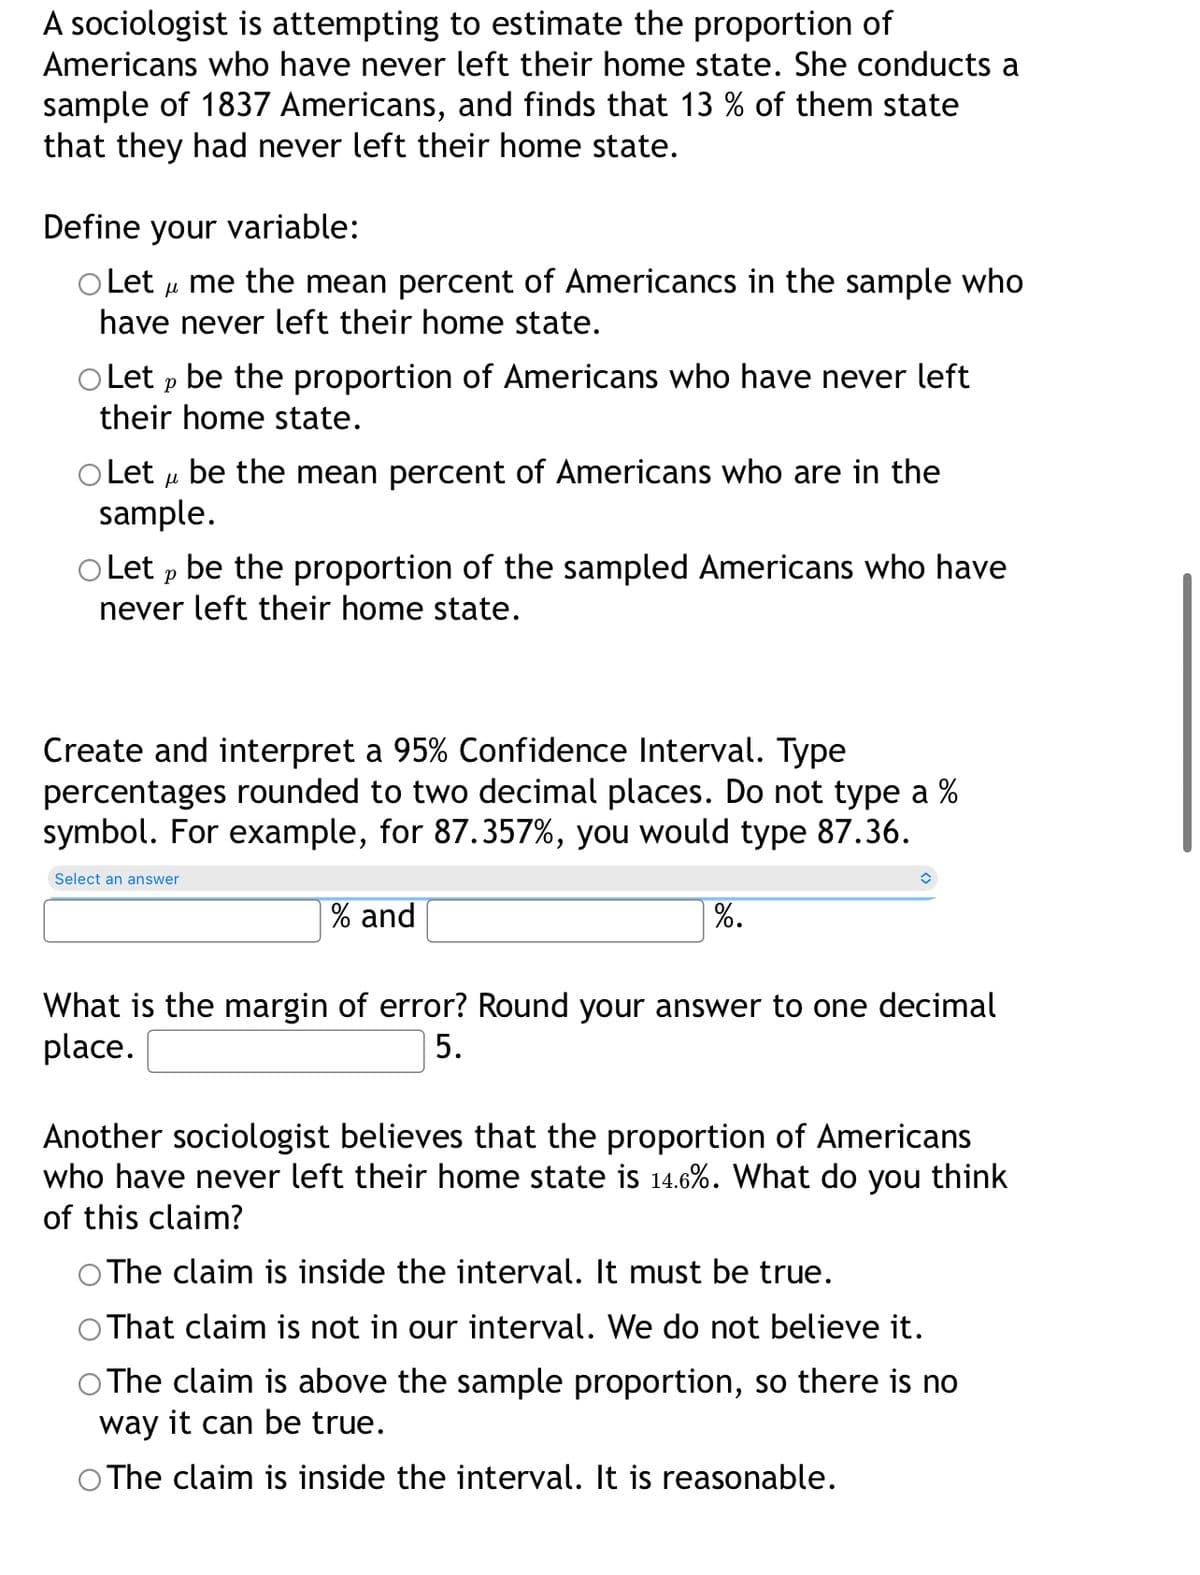 A sociologist is attempting to estimate the proportion of
Americans who have never left their home state. She conducts a
sample of 1837 Americans, and finds that 13 % of them state
that they had never left their home state.
Define your variable:
O Let u me the mean percent of Americancs in the sample who
have never left their home state.
O Let p be the proportion of Americans who have never left
their home state.
o Let u be the mean percent of Americans who are in the
sample.
O Let p be the proportion of the sampled Americans who have
never left their home state.
Create and interpret a 95% Confidence Interval. Type
percentages rounded to two decimal places. Do not type a %
symbol. For example, for 87.357%, you would type 87.36.
Select an answer
% and
%.
What is the margin of error? Round your answer to one decimal
place.
5.
Another sociologist believes that the proportion of Americans
who have never left their home state is 14.6%. What do you think
of this claim?
The claim is inside the interval. It must be true.
That claim is not in our interval. We do not believe it.
O The claim is above the sample proportion, so there is no
way it can be true.
O The claim is inside the interval. It is reasonable.
